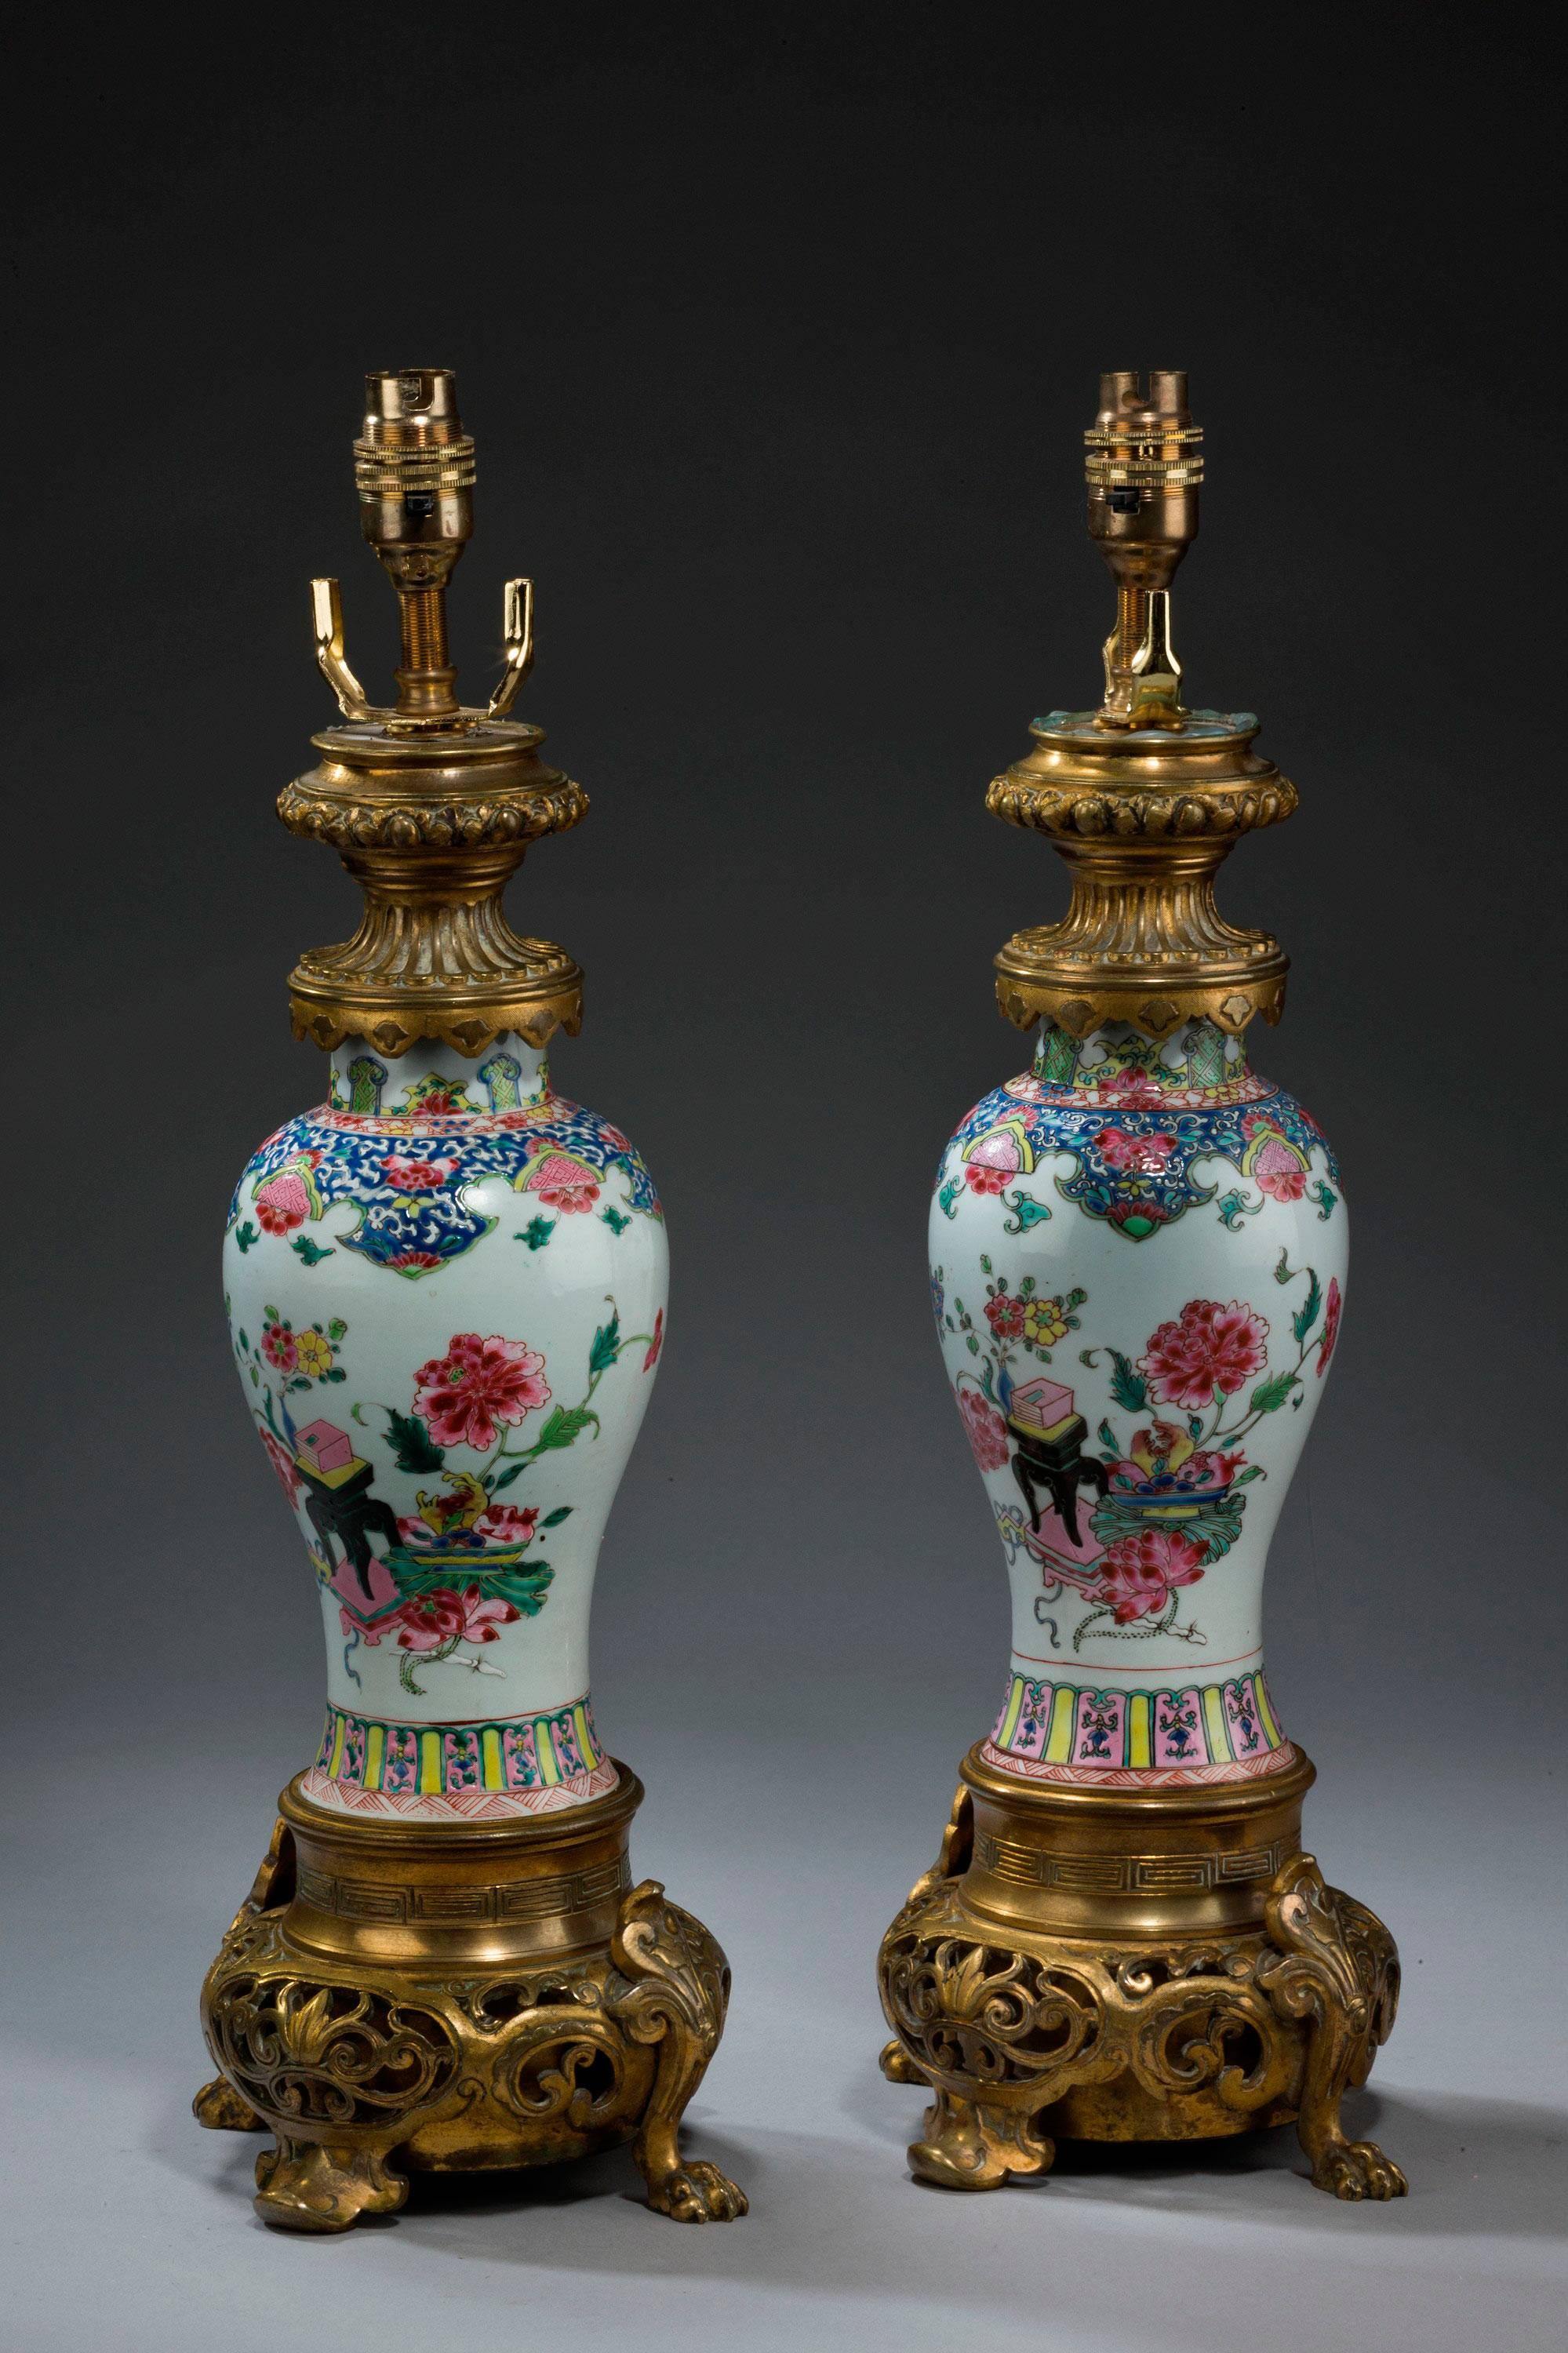 Pair of 19th century Canton porcelain vase lamps, with 18th century gilding. The ovoid bodies with oriental flowers decoration. Heavily cast bases.

Canton porcelains are Chinese ceramic wares made for export in the 18th-20th centuries. The wares